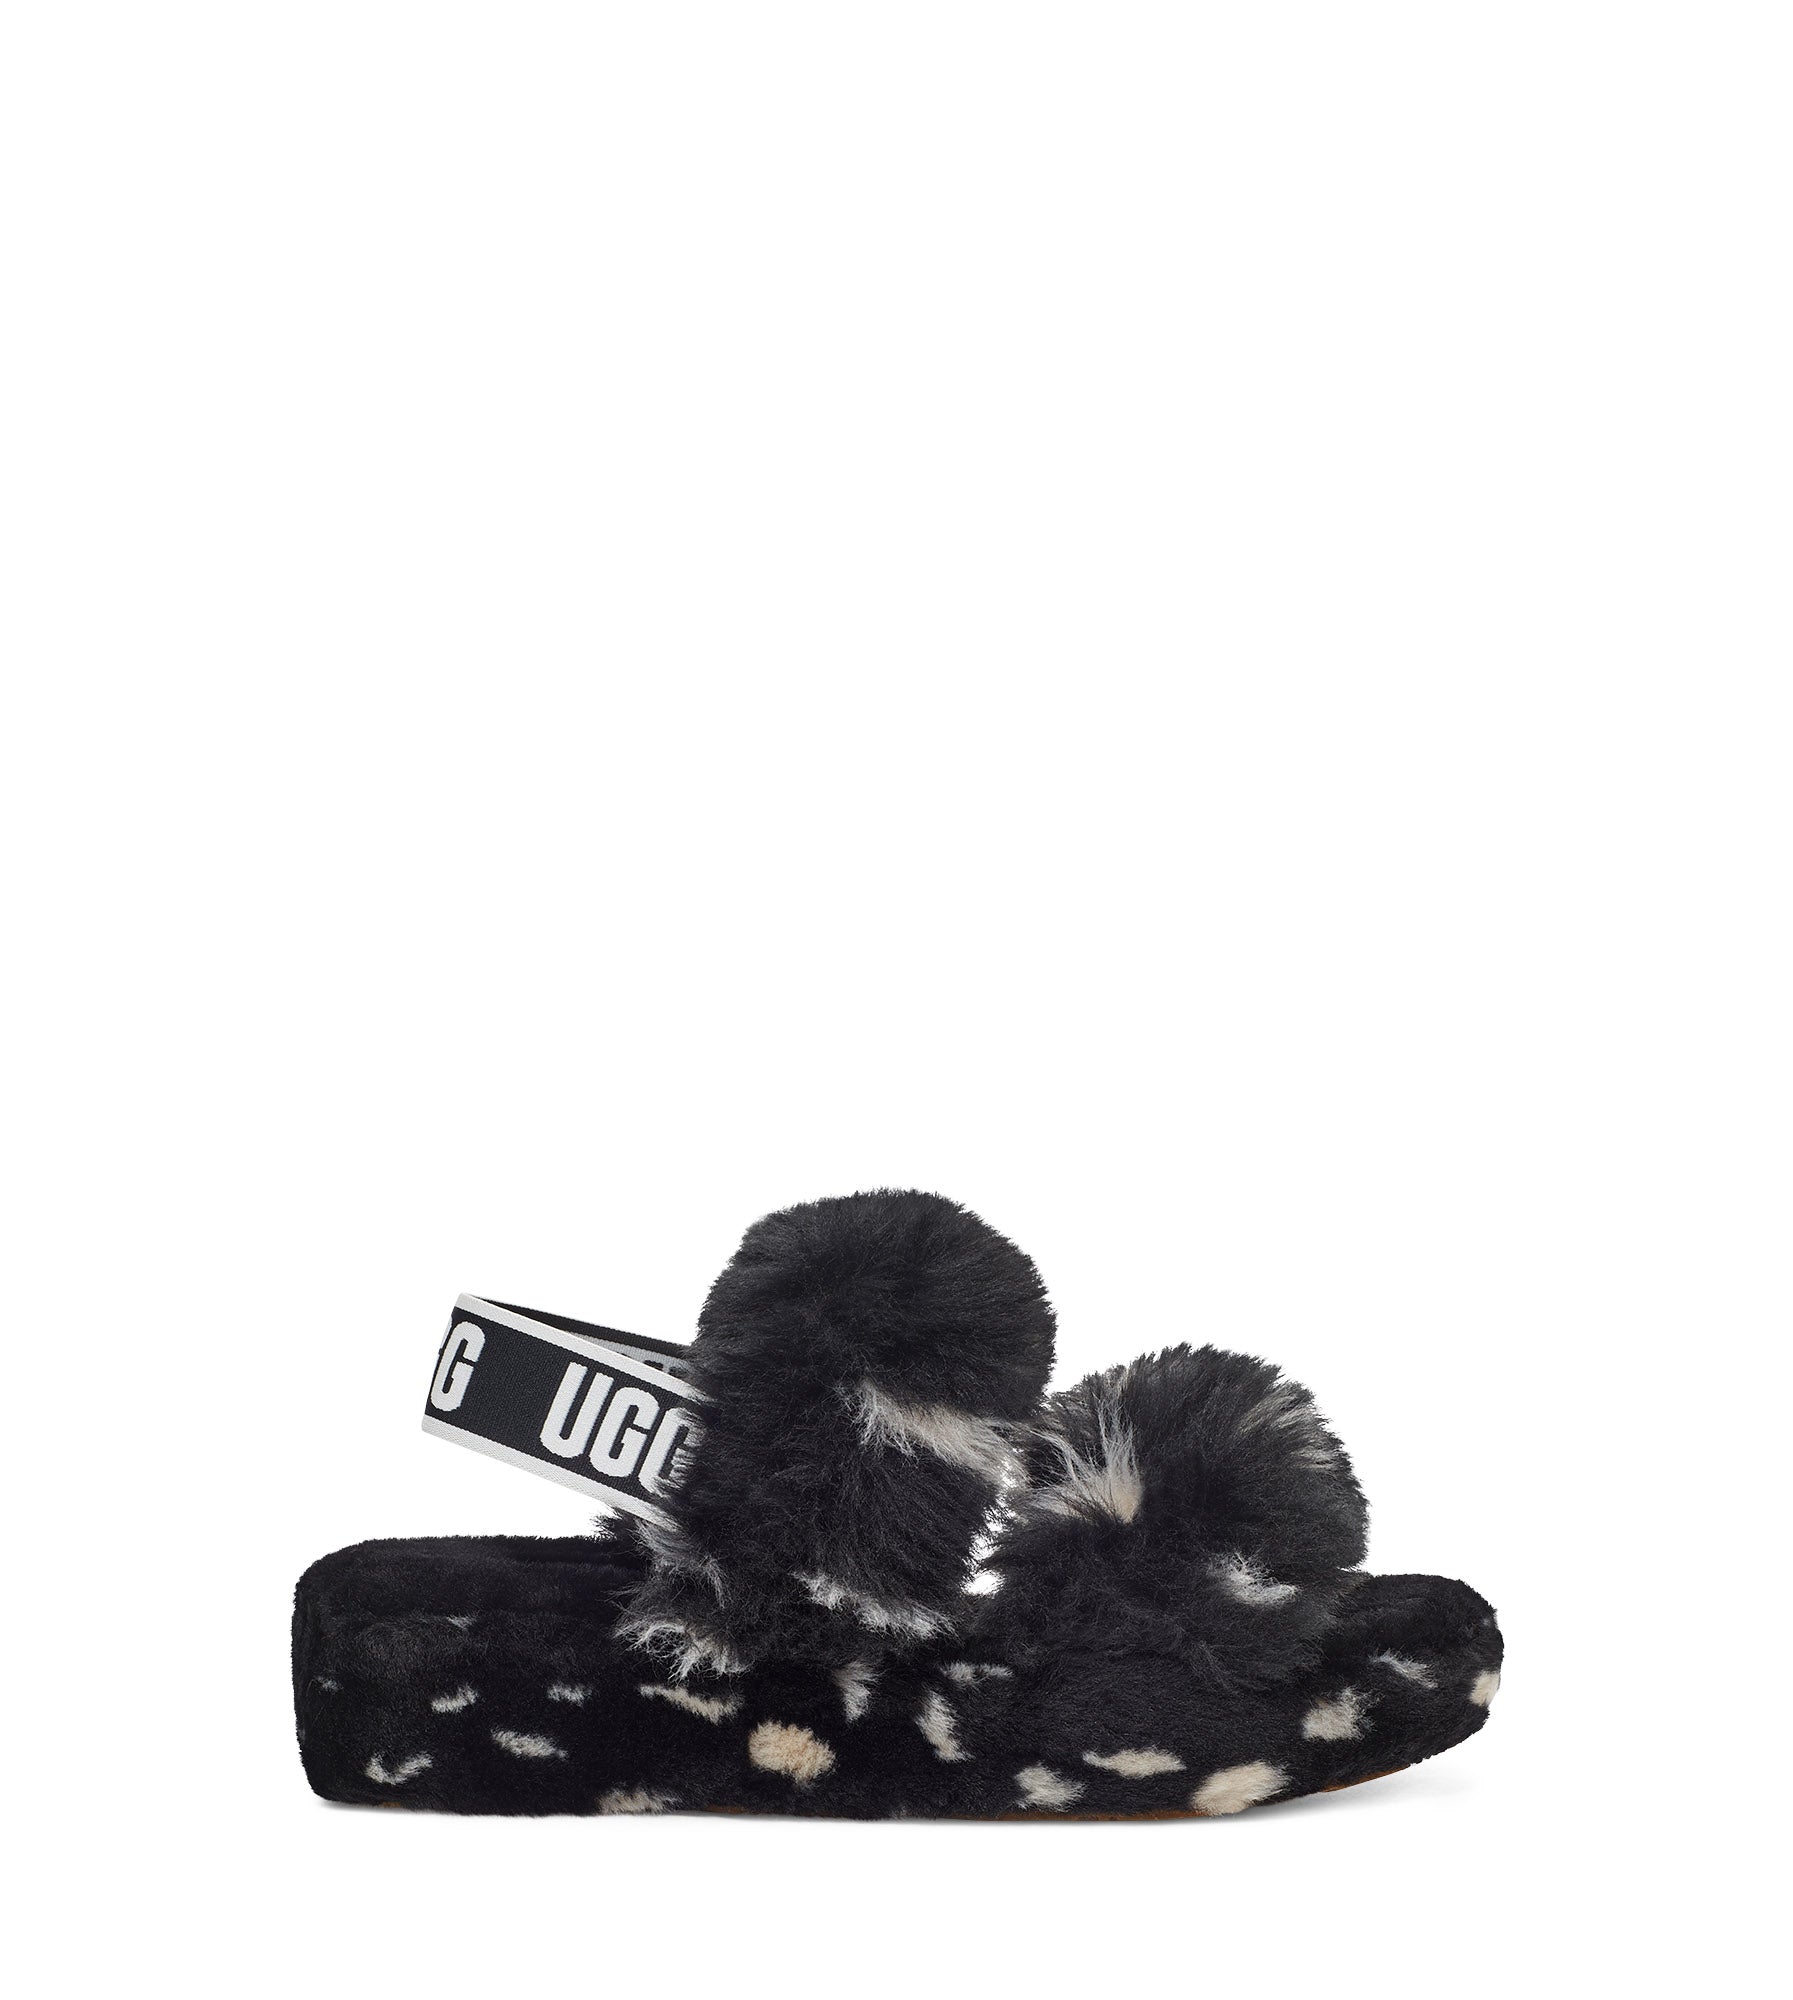 UGG UGG Oh Yeah Spots Slippers Black 3 